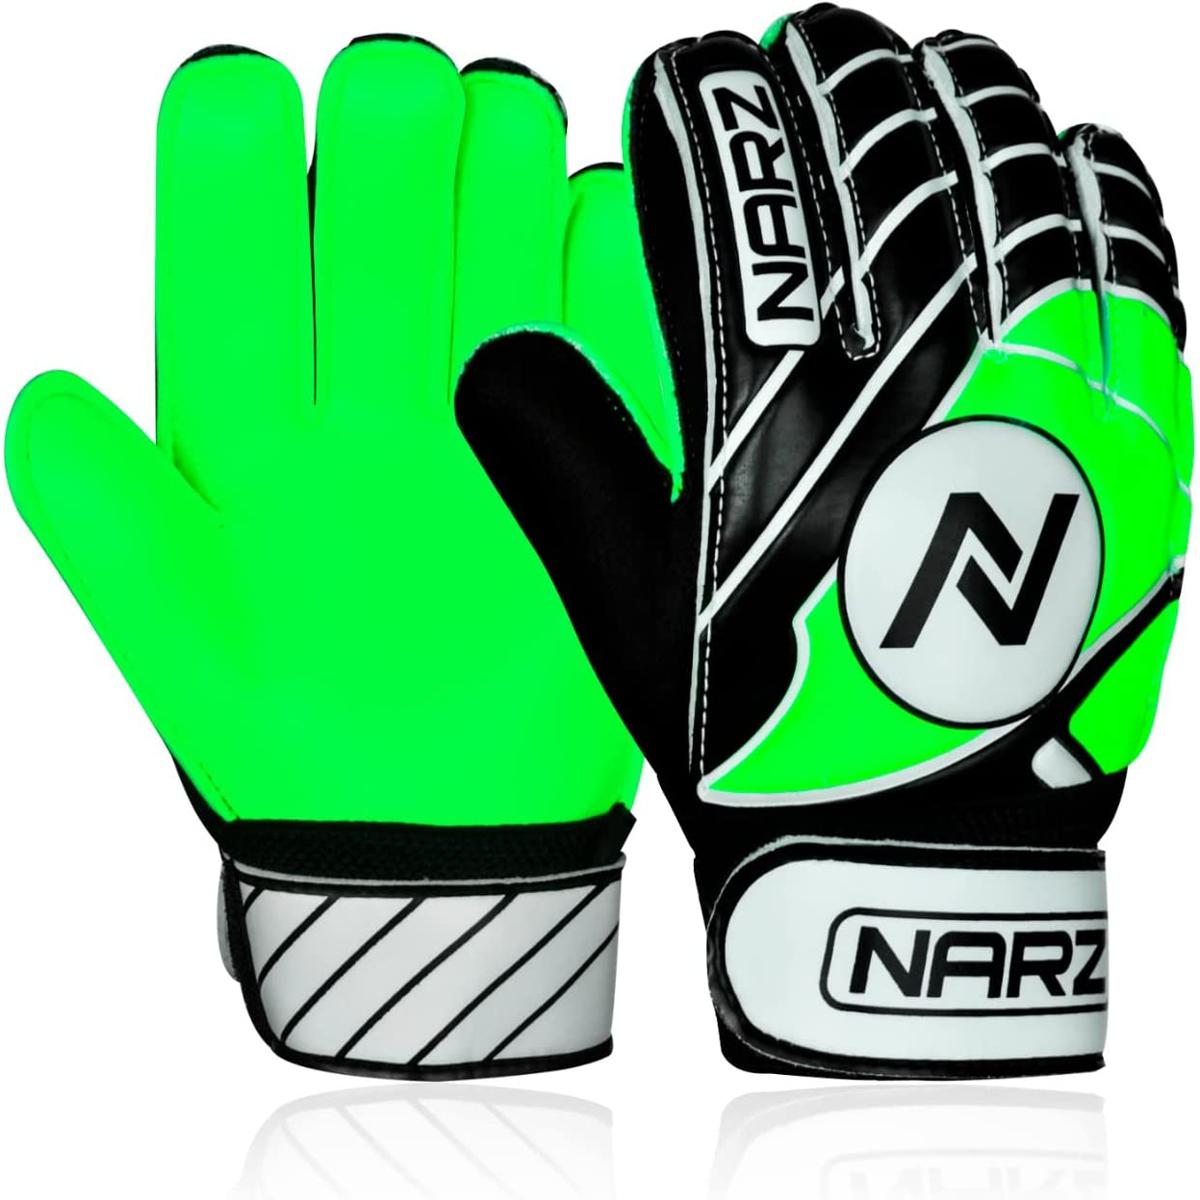  Sportout Youth&Adult Goalie Goalkeeper Gloves,Strong